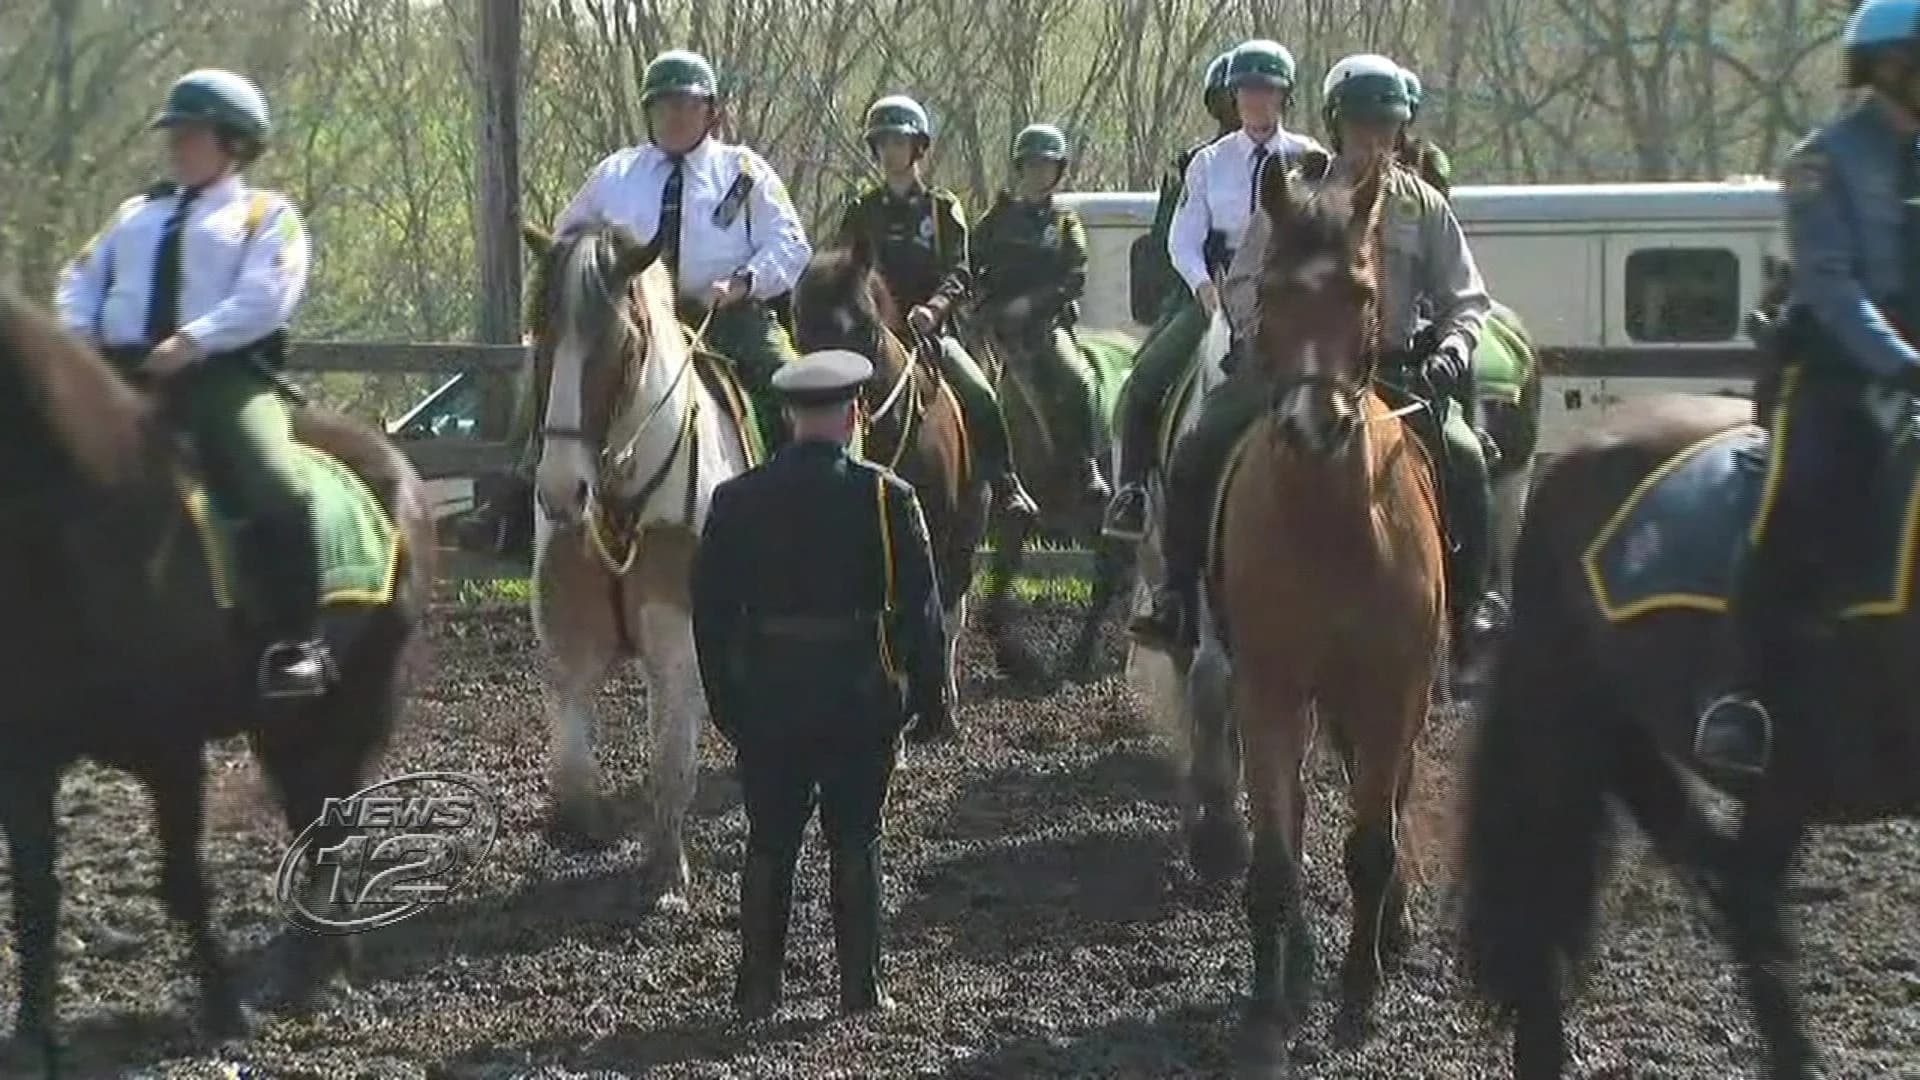 Mounted police graduate from academy